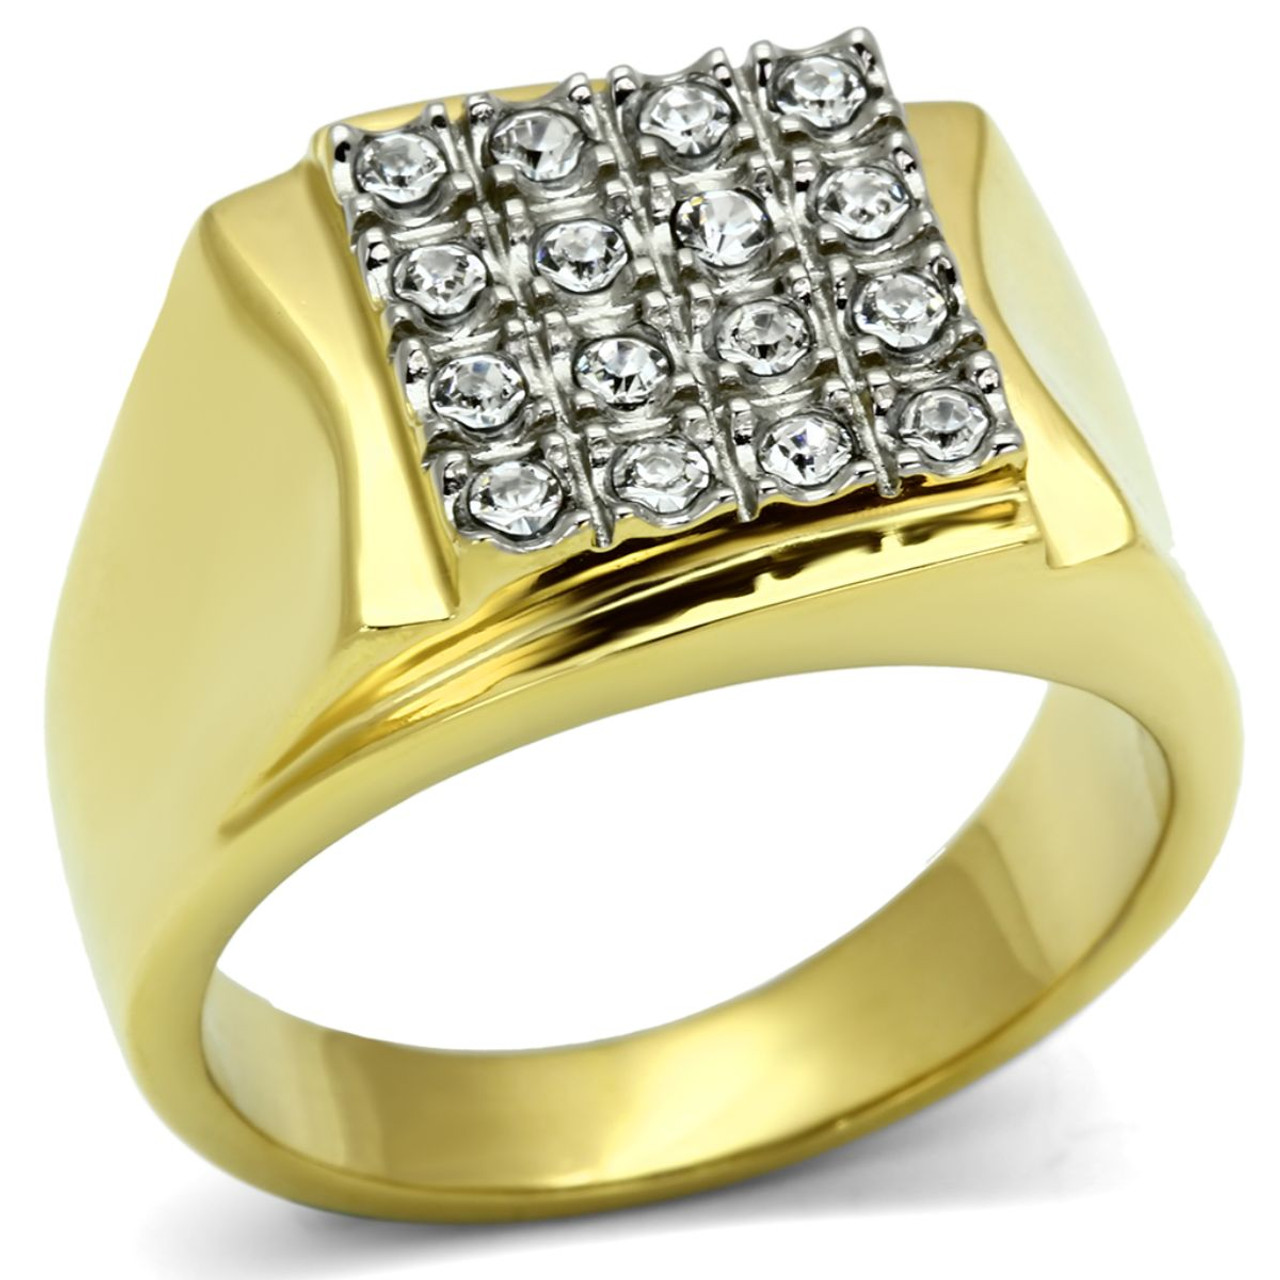 Buy KuberBox 18K Gold and Diamond Bruce Ring For Men Size 30 at Amazon.in